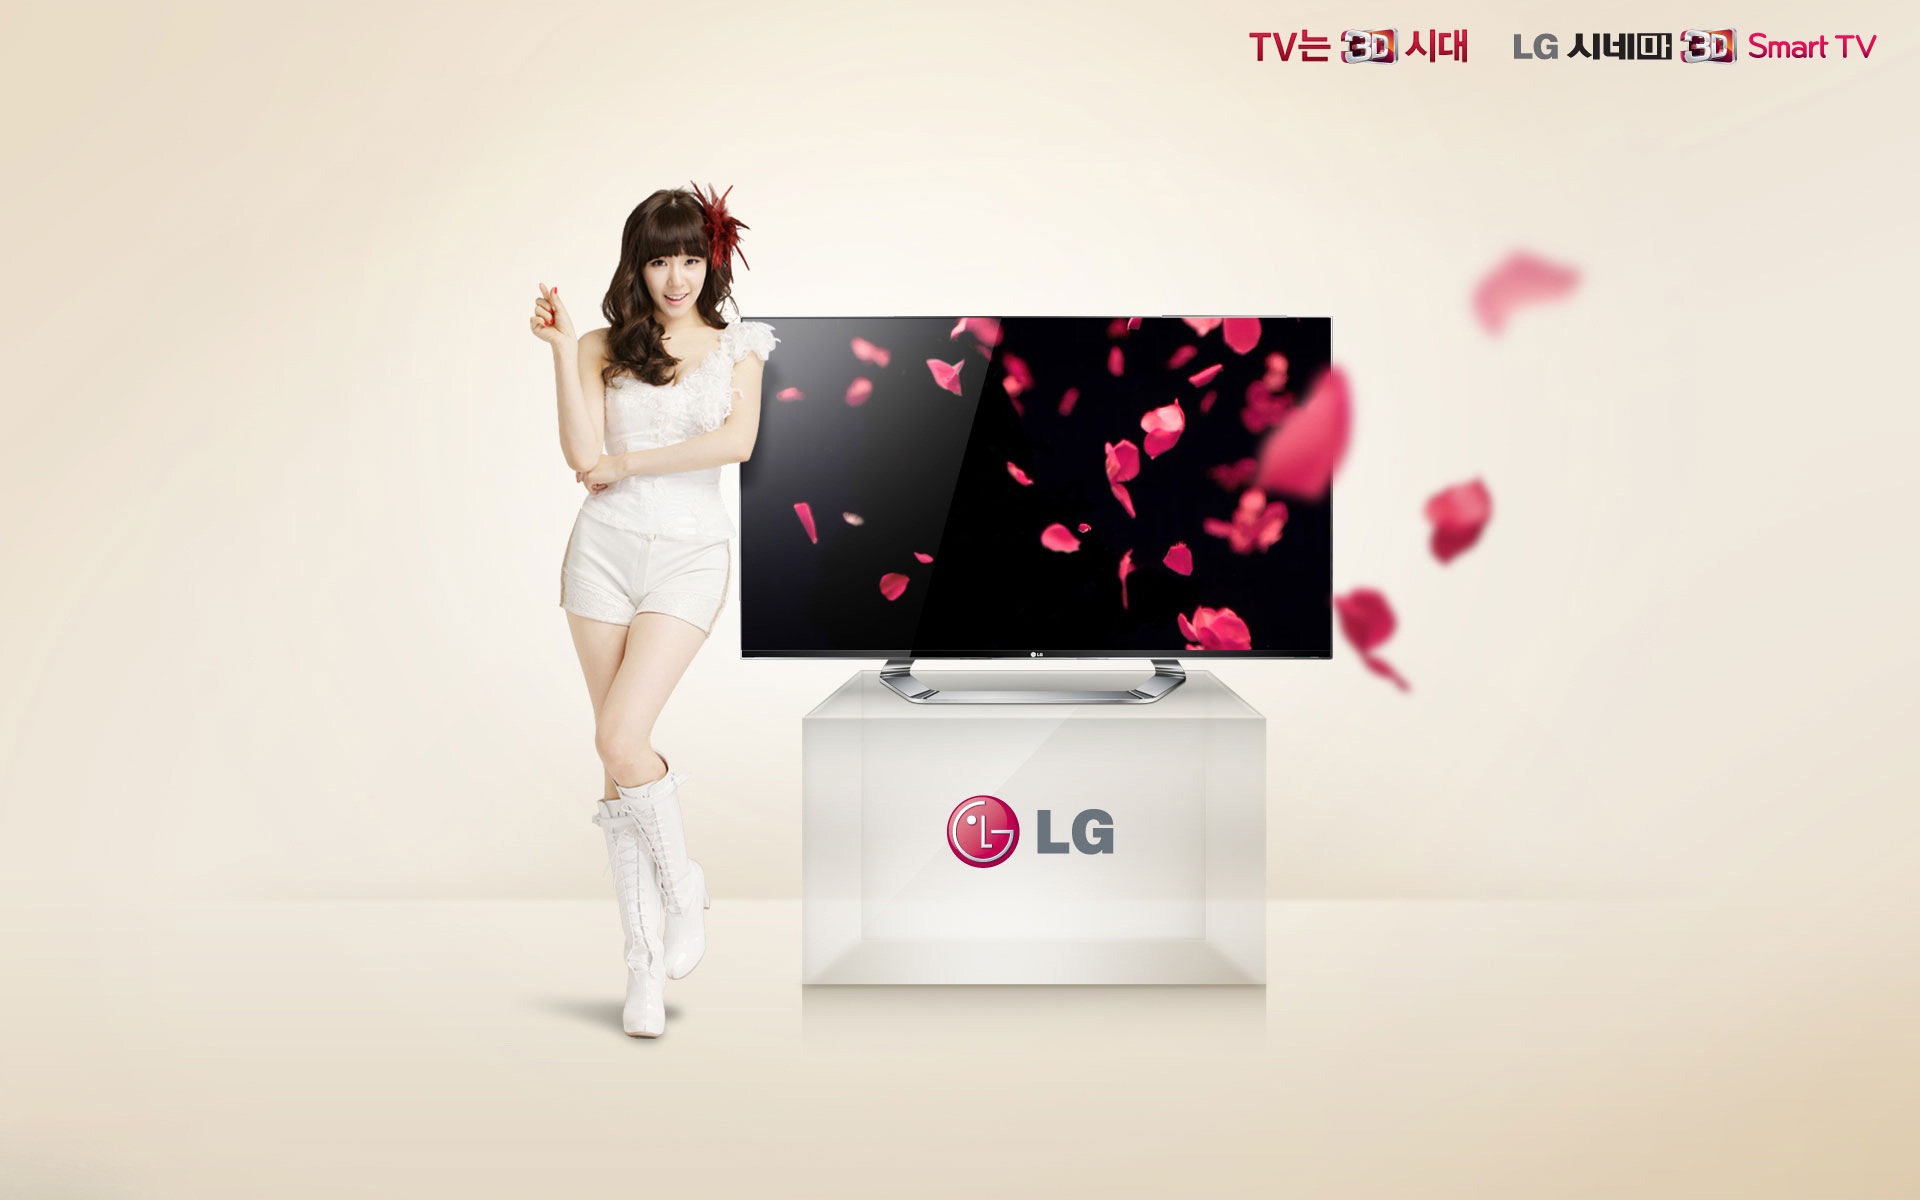 Girls Generation ACE and LG endorsements ads HD wallpapers #15 - 1920x1200